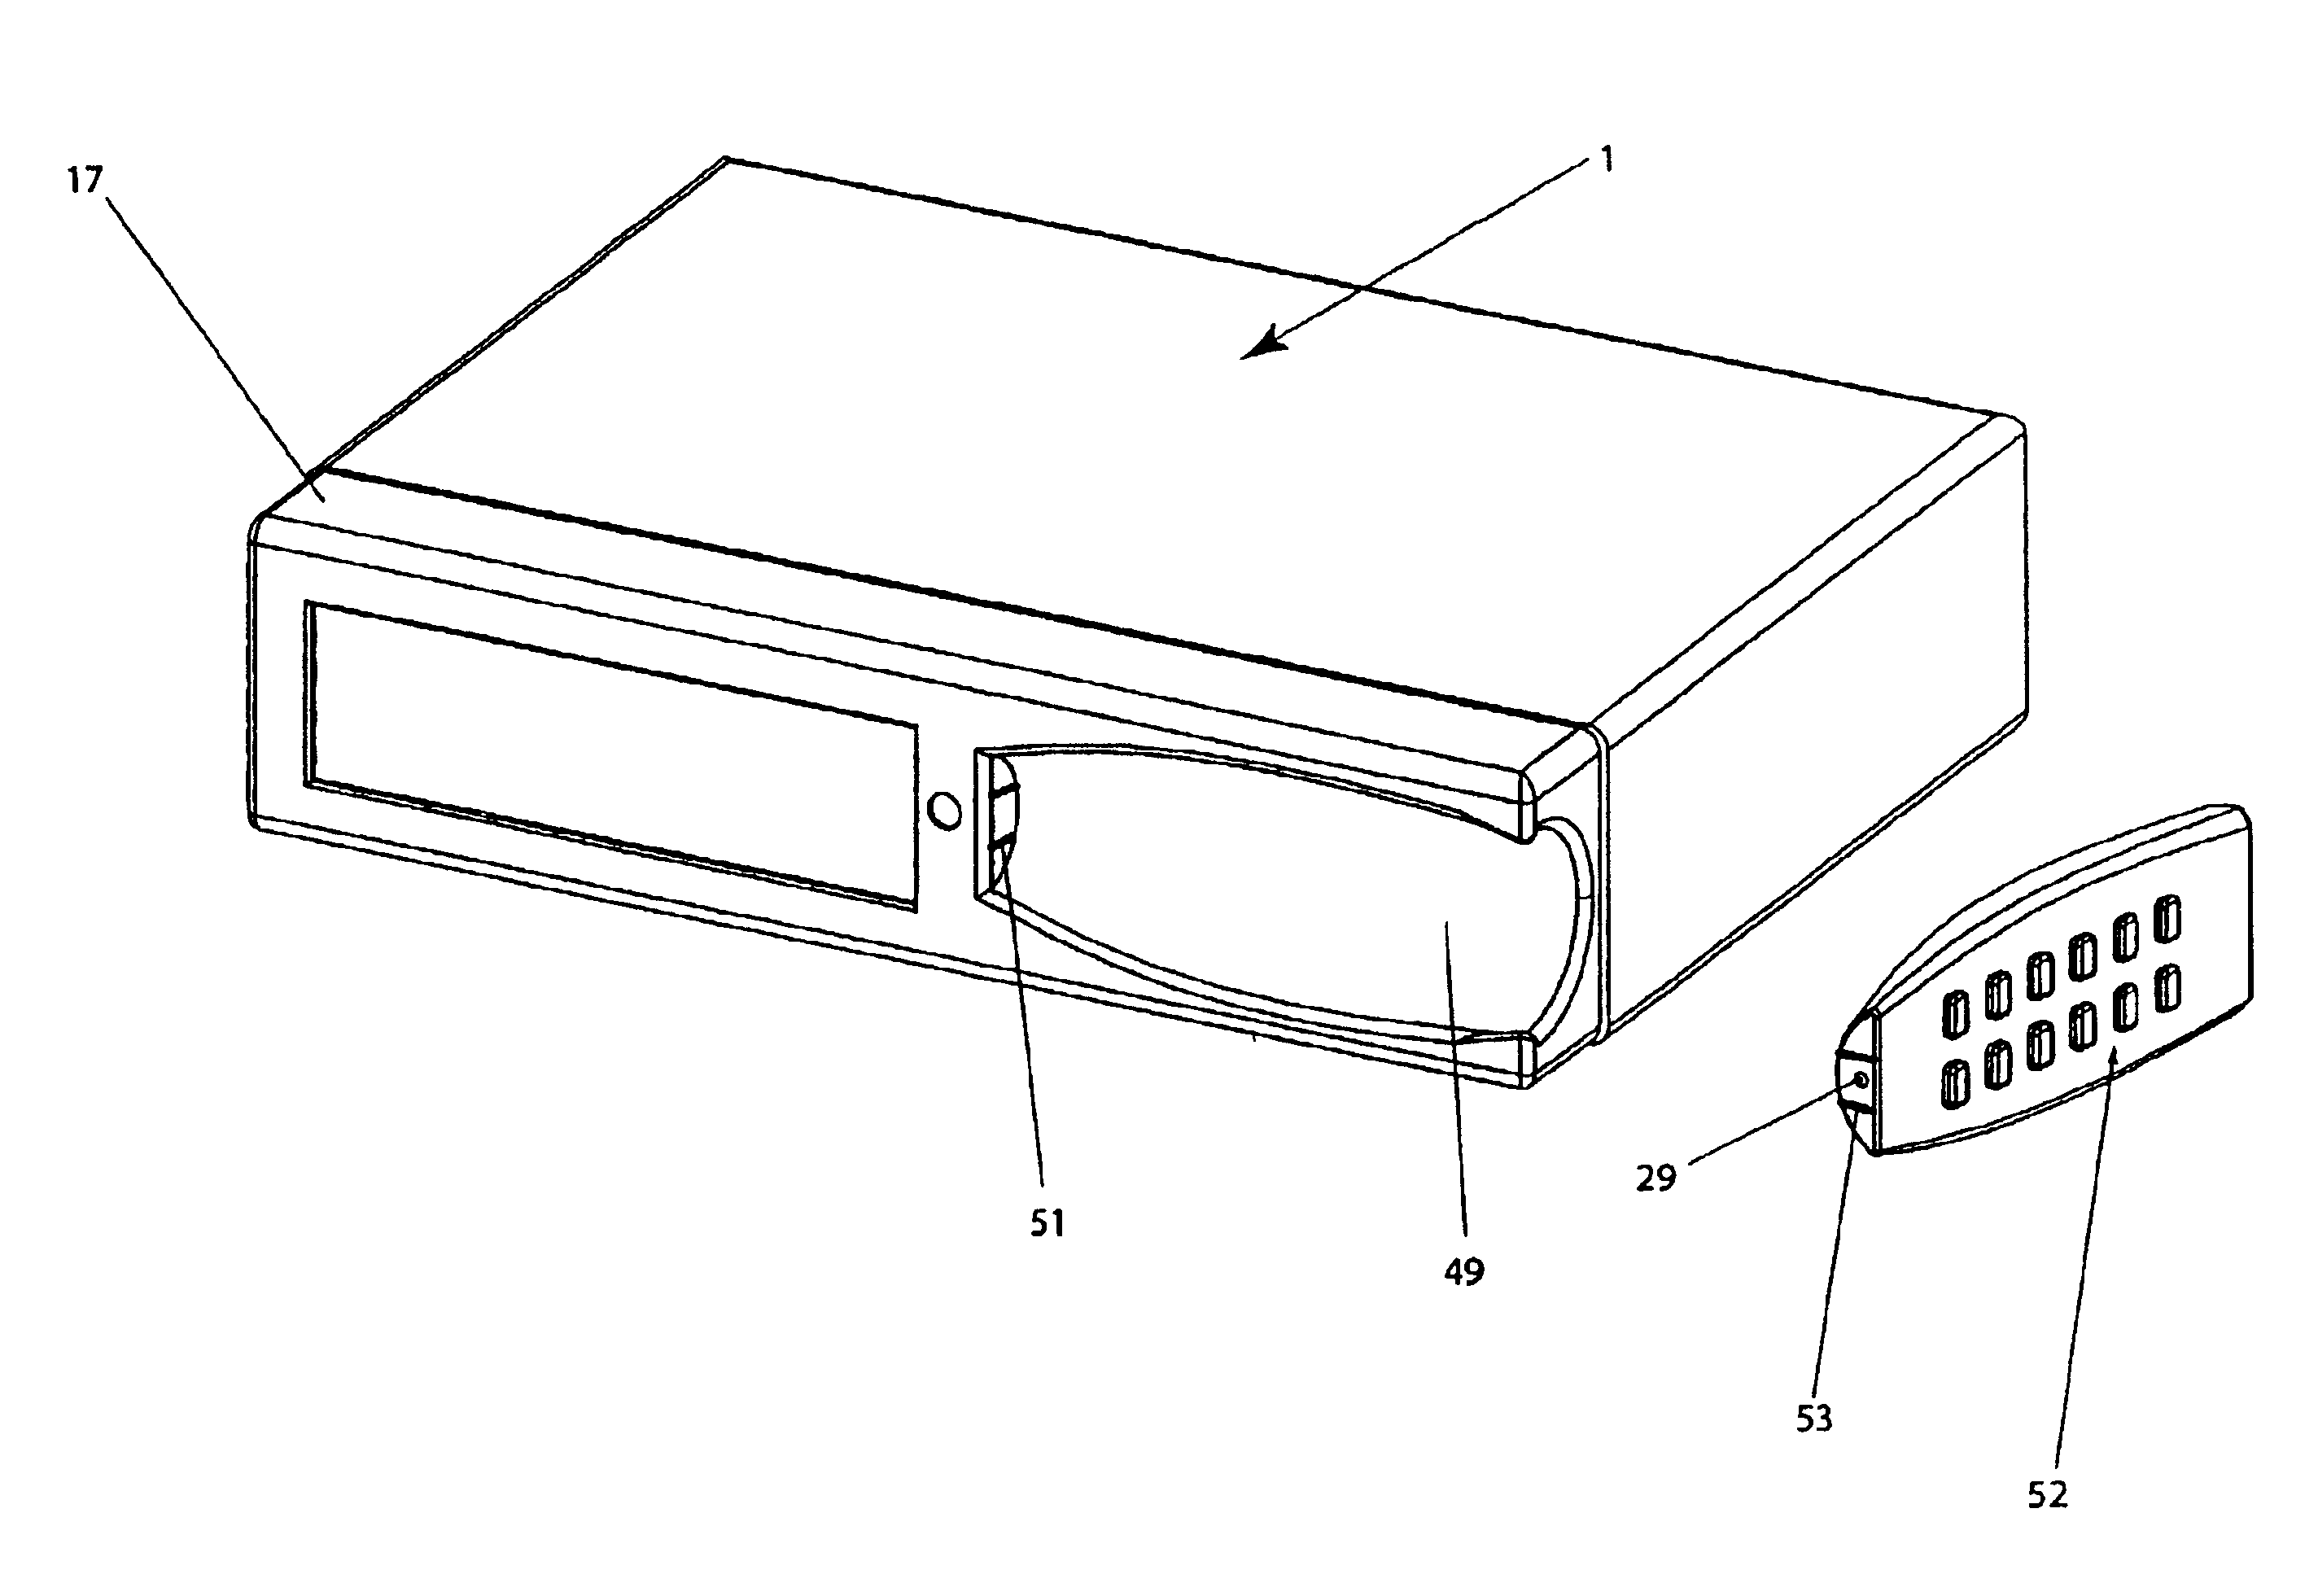 Detachable remote controller for an electronic entertainment device and a method for using the same